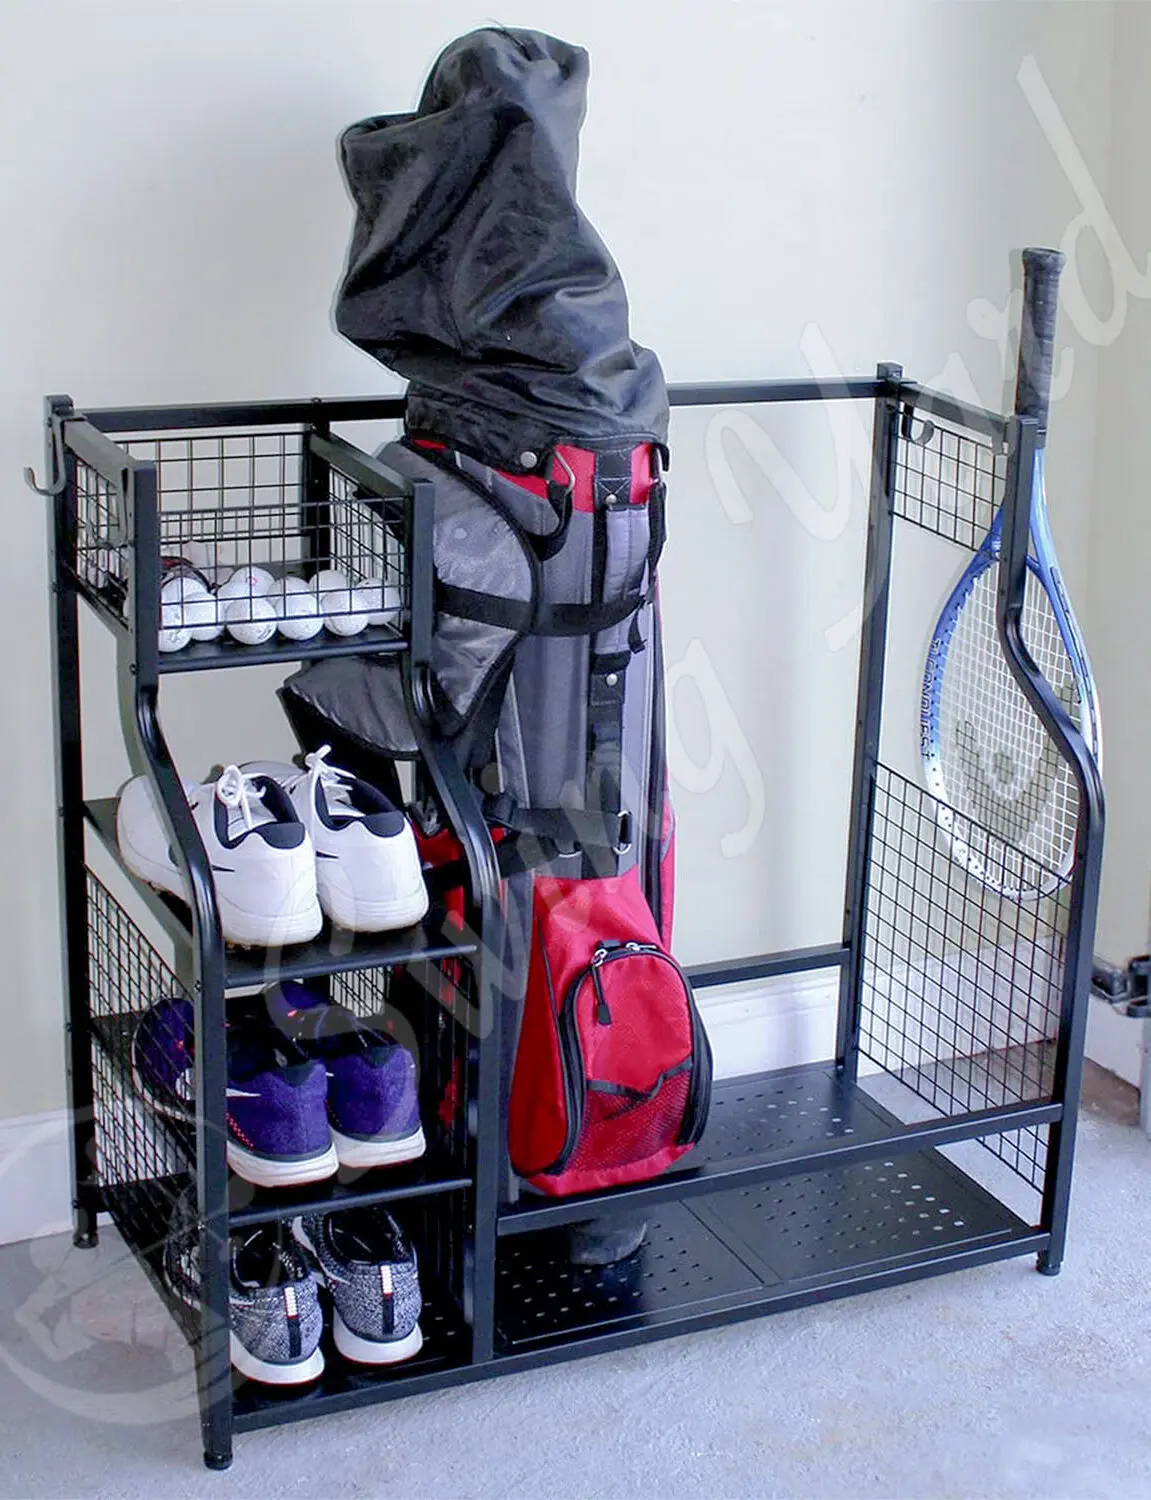 https://swingyard.com/wp-content/uploads/A-photo-of-the-new-PLKOW-large-golf-bag-rack-storage-in-my-garage-e1689890433390.jpg.webp